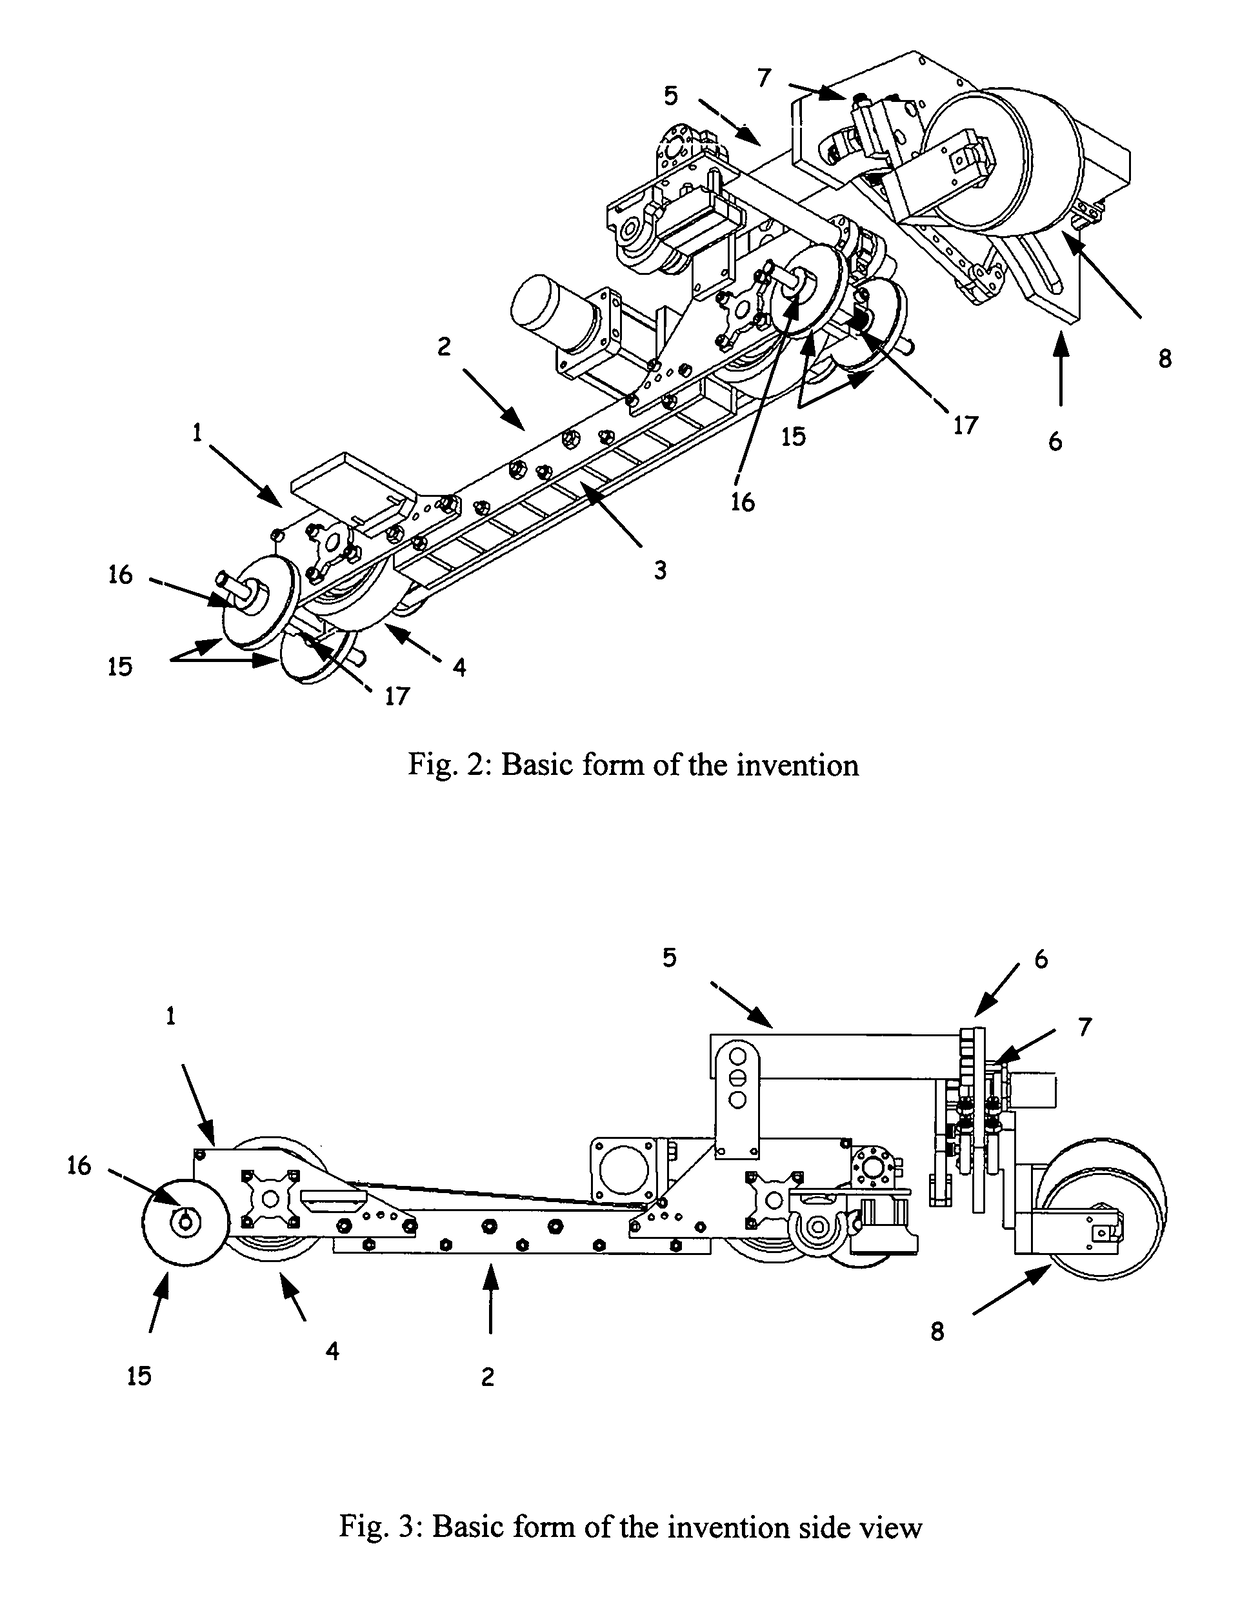 One-dimensional climbing vehicle with resilient guide mechanism